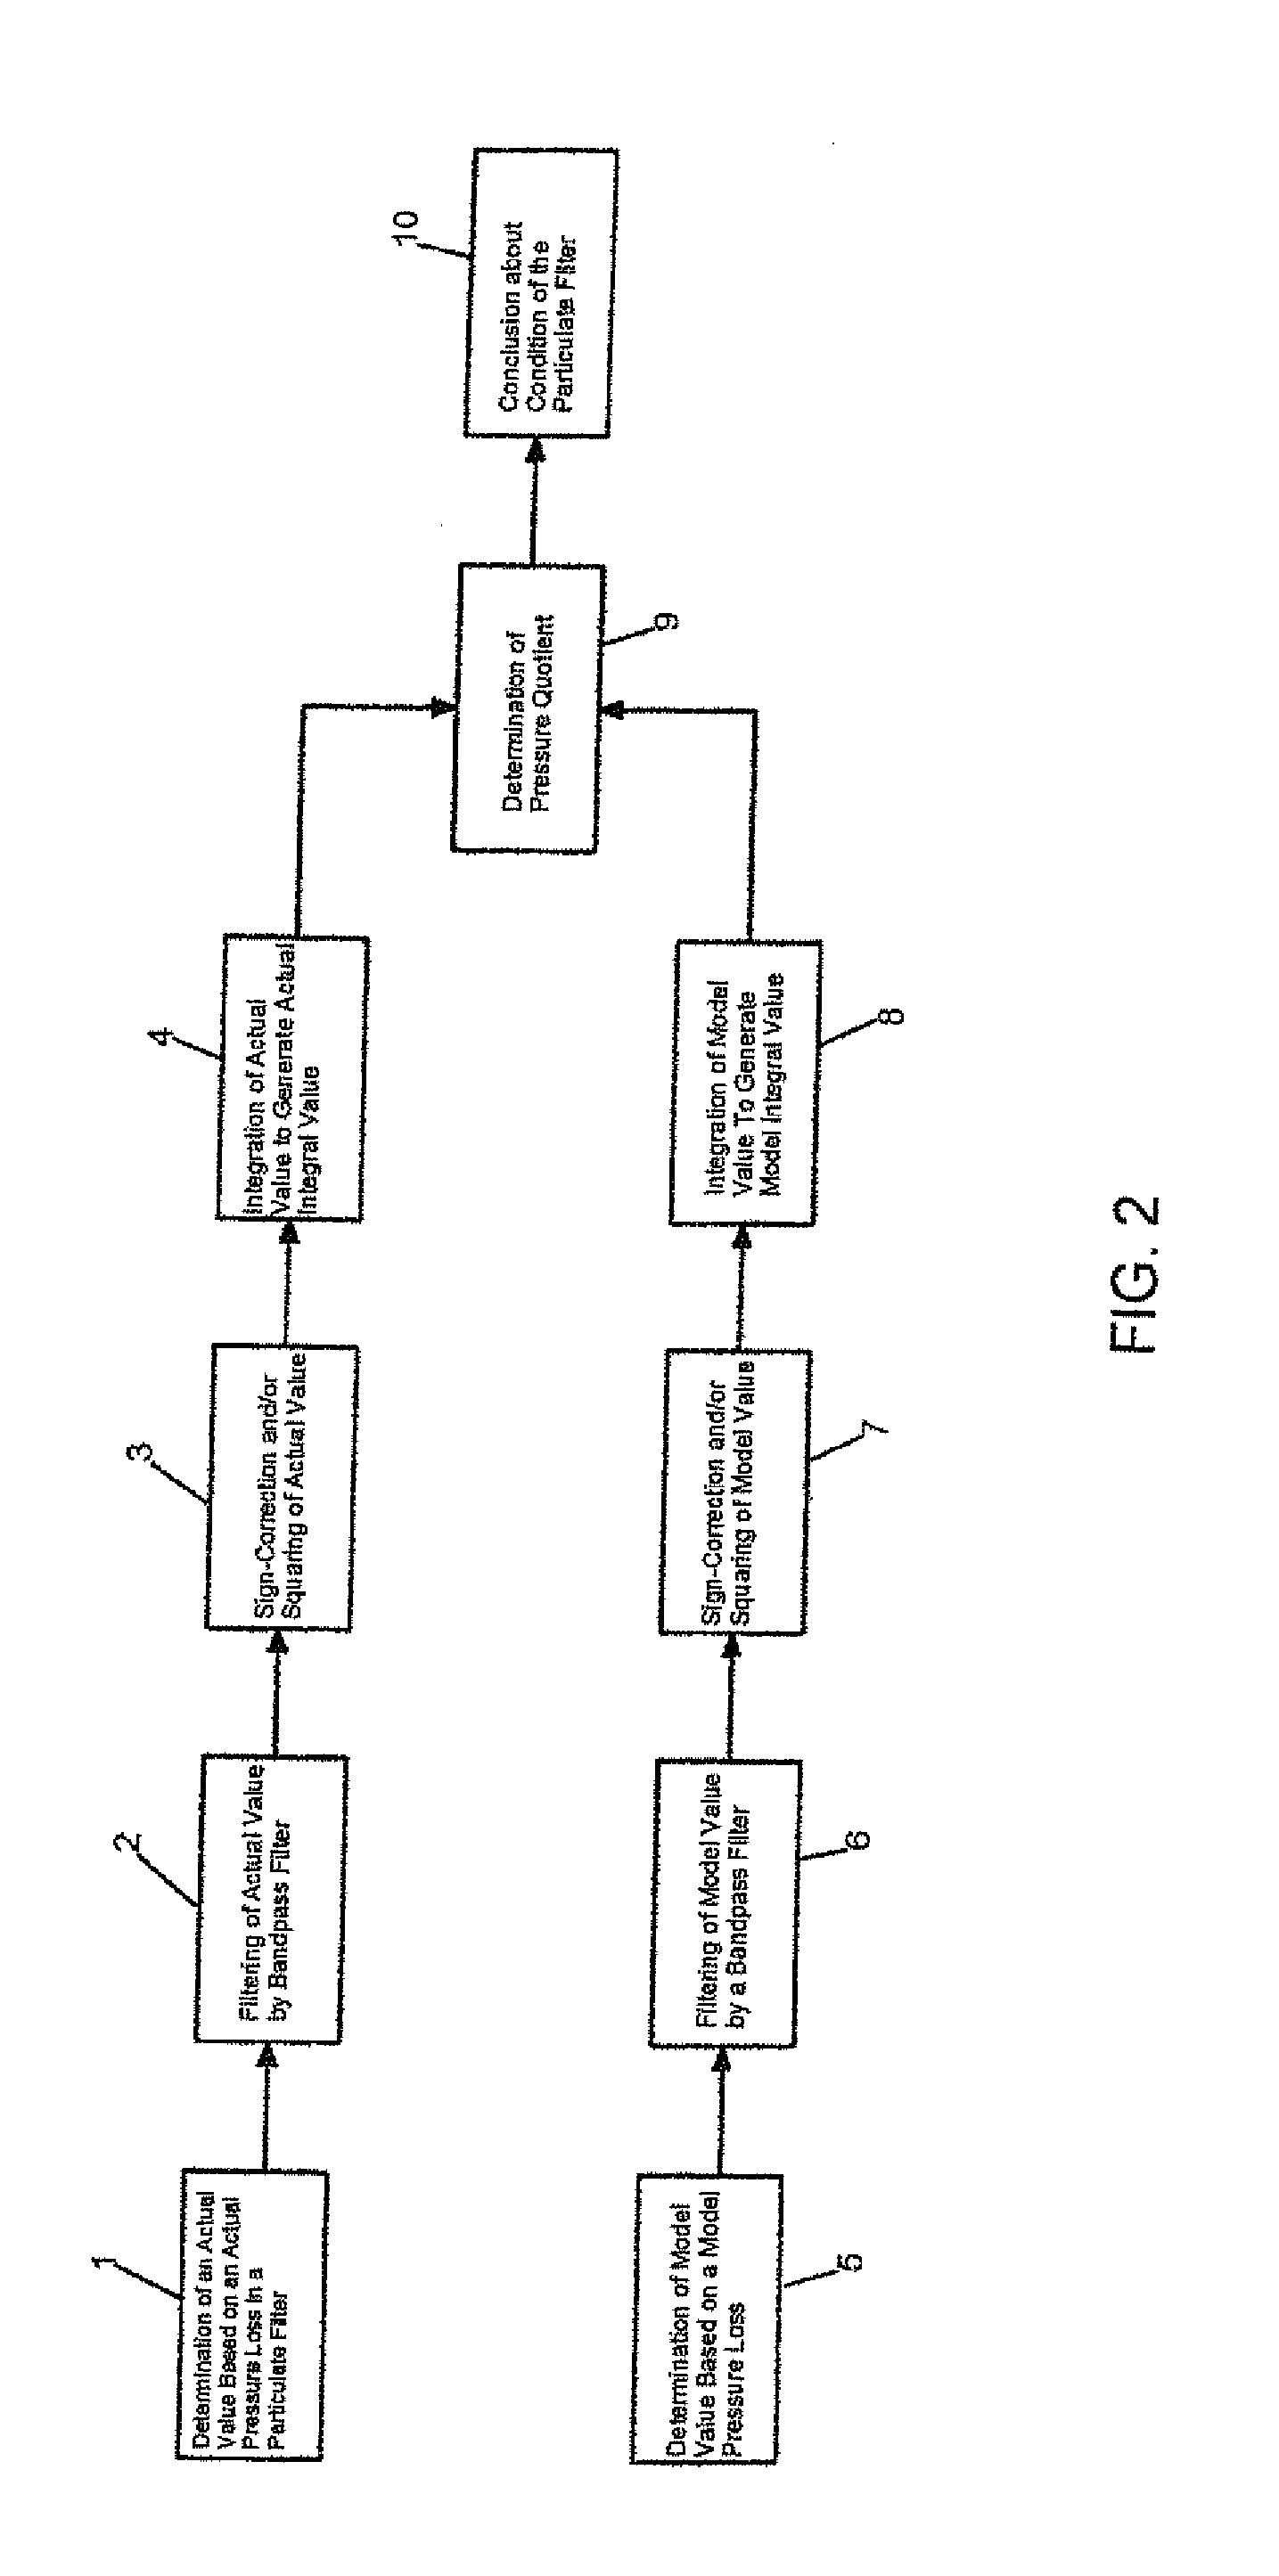 Method of operating an exhaust emission control device, and corresponding exhaust emission control device